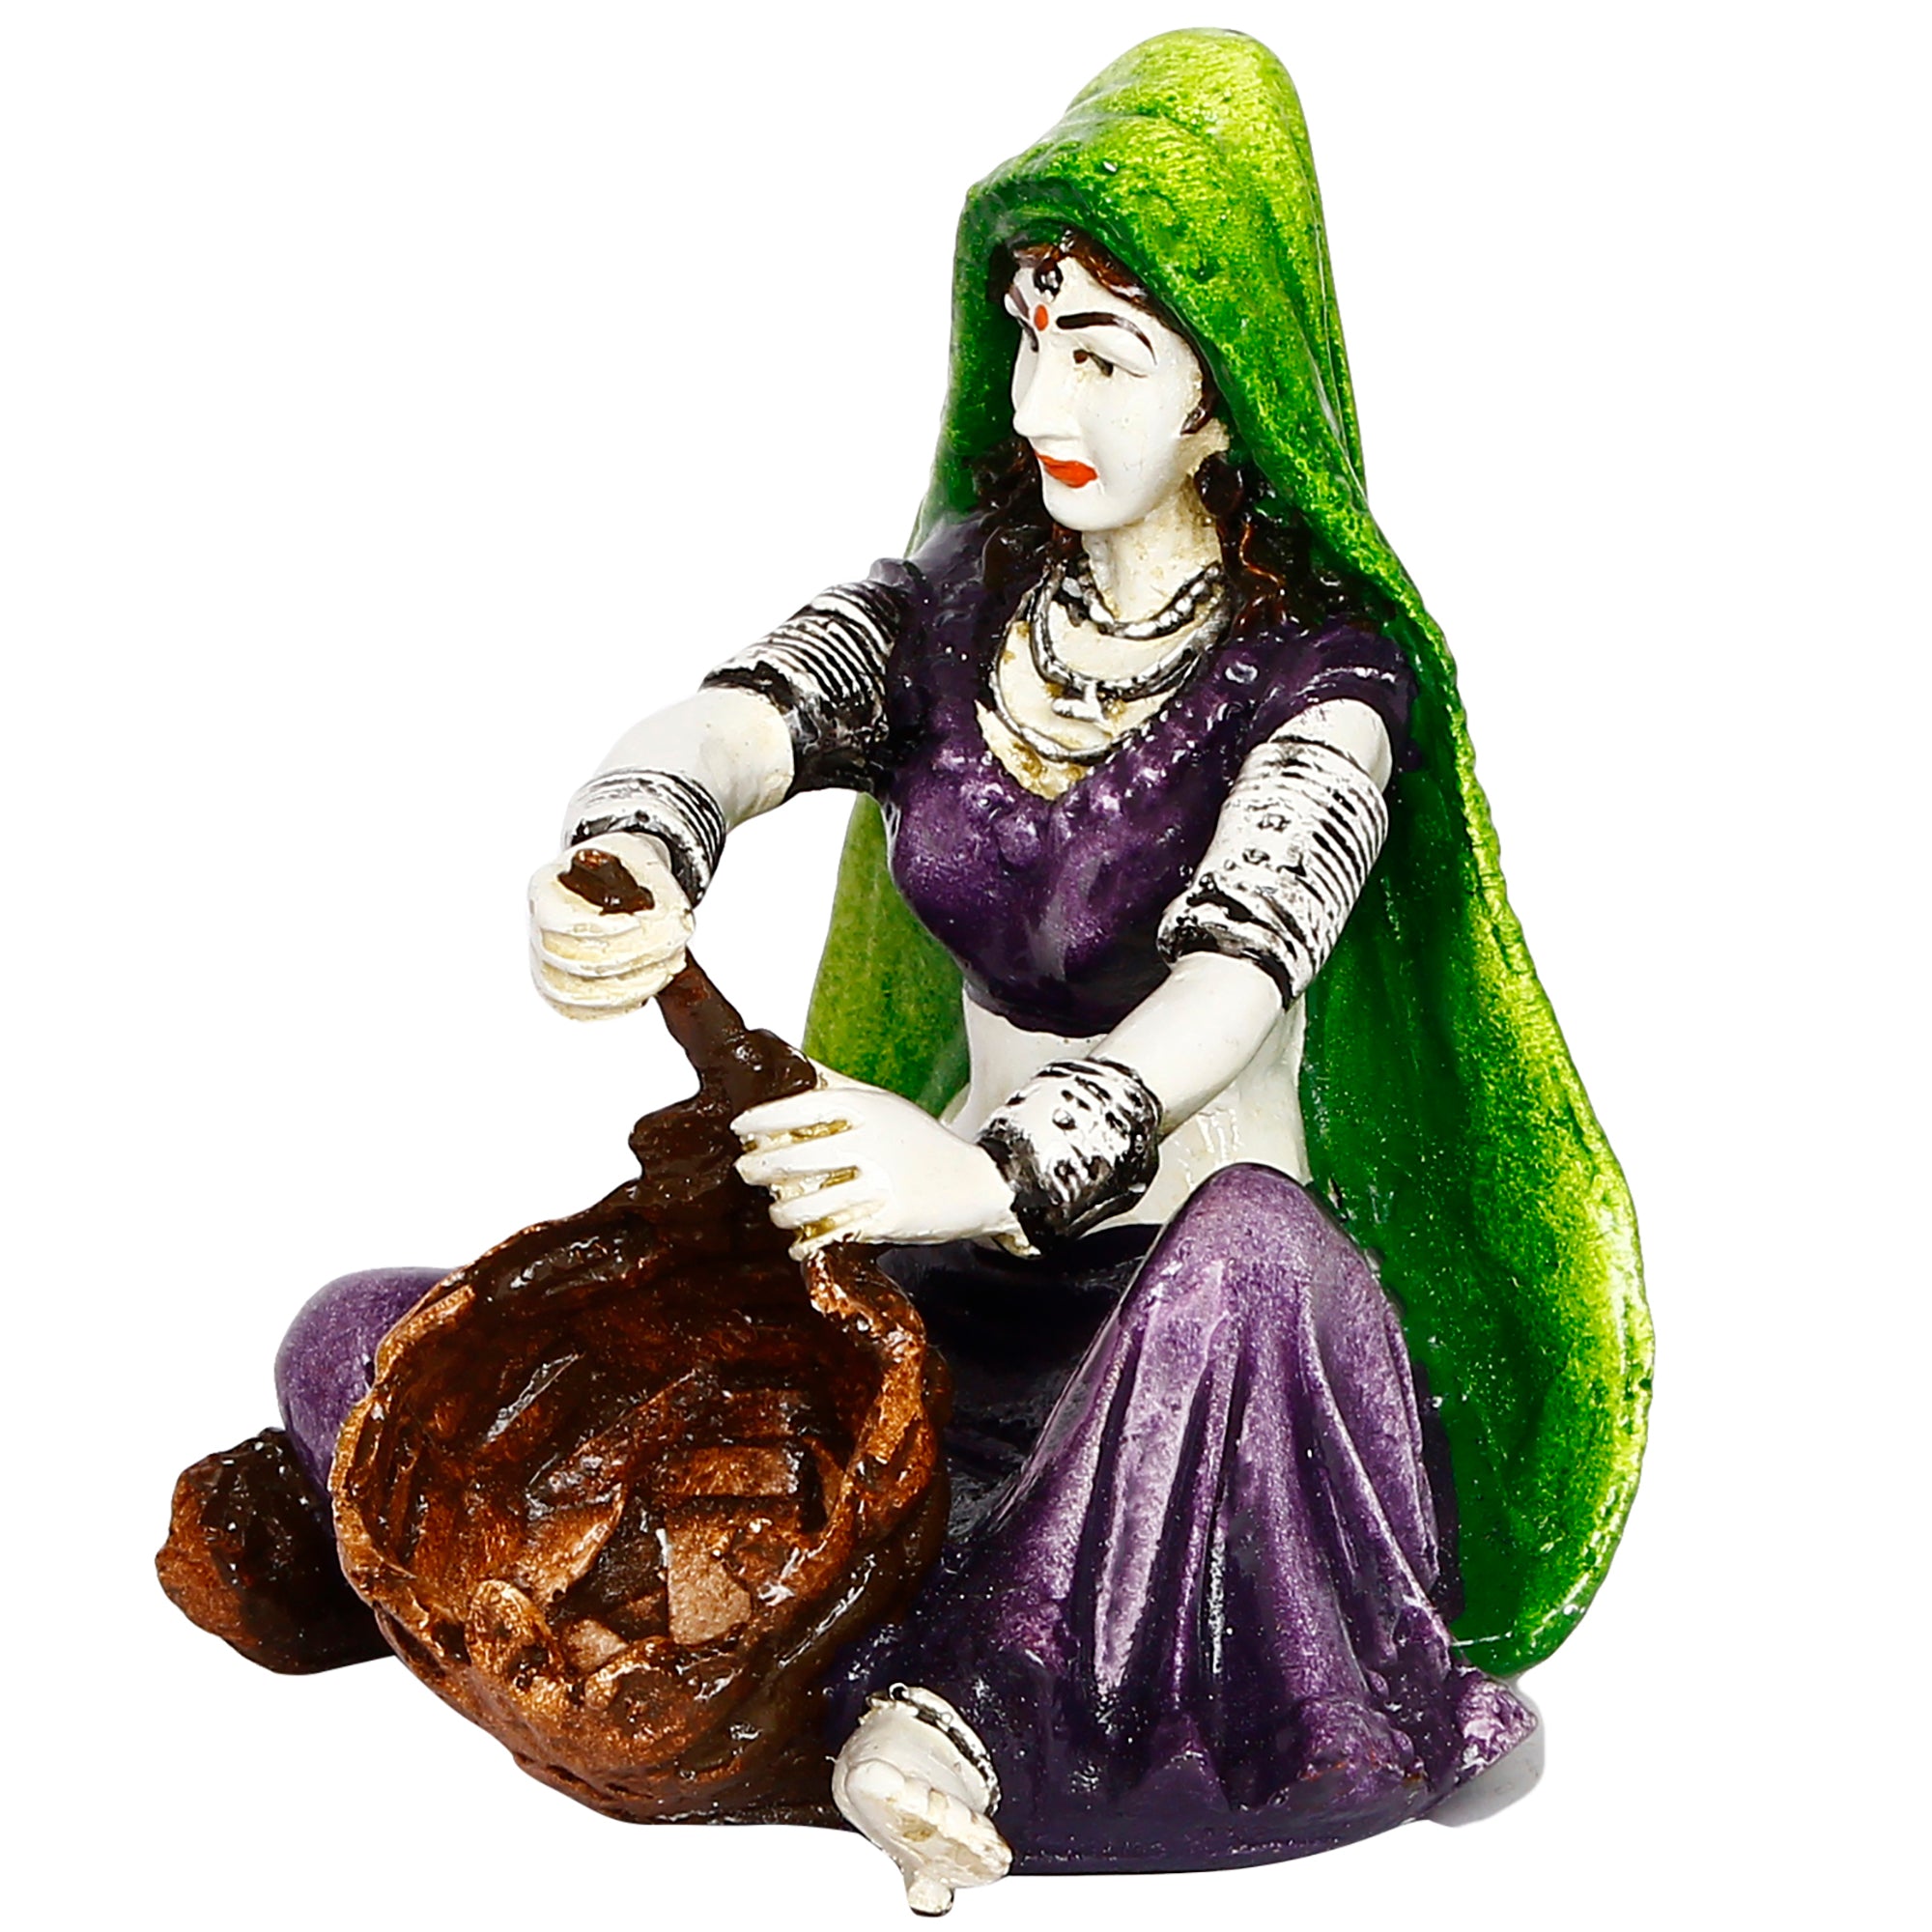 Polyresin Rajasthani Lady Creating Craft Product Handcrafted Human Figurine Decorative Showpiece 5